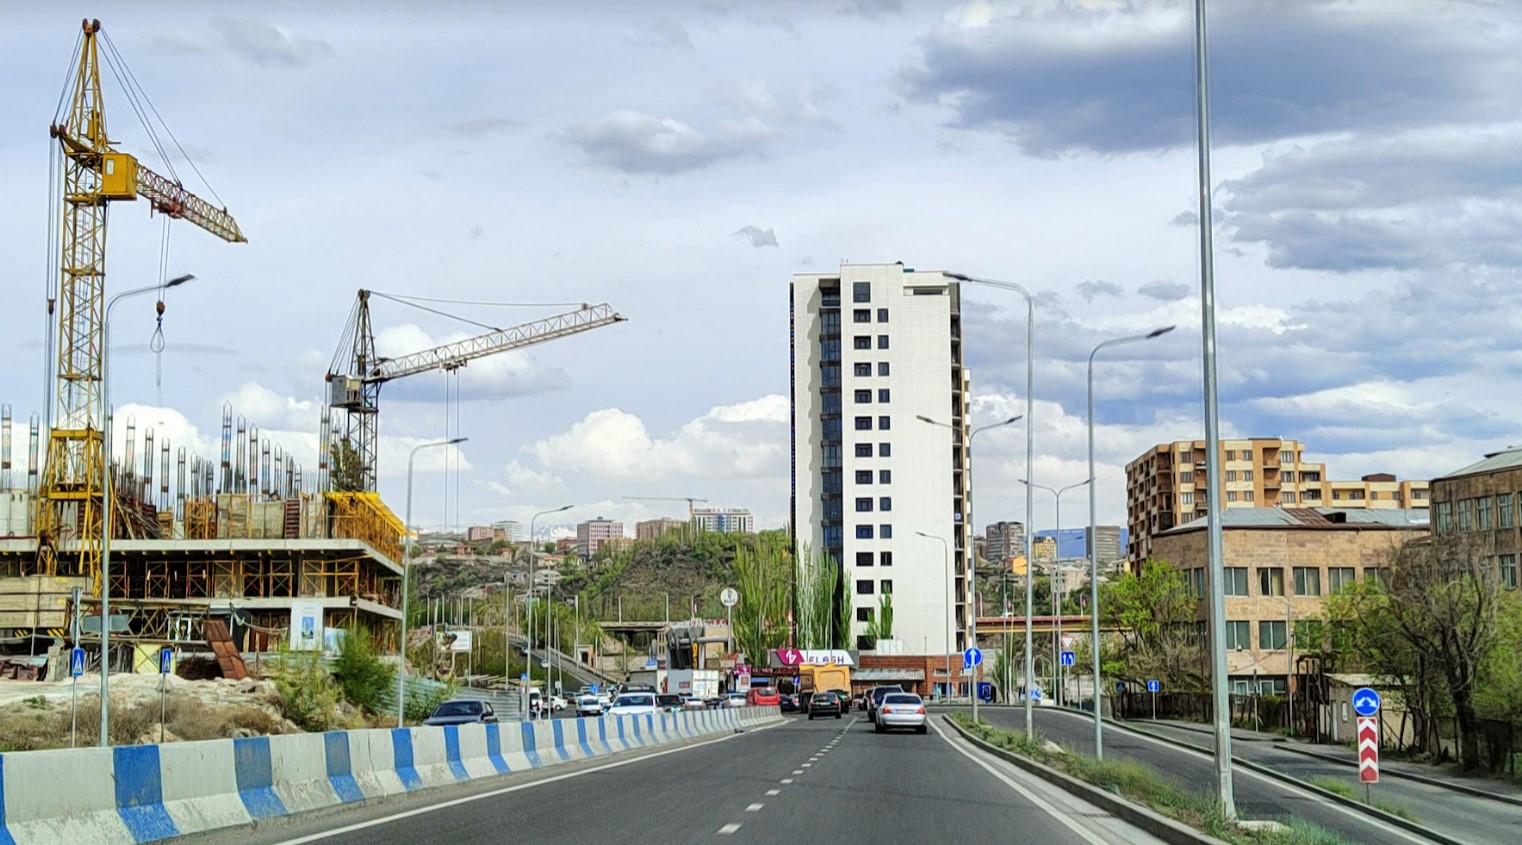 New buildings and construction in Yerevan, Armenia